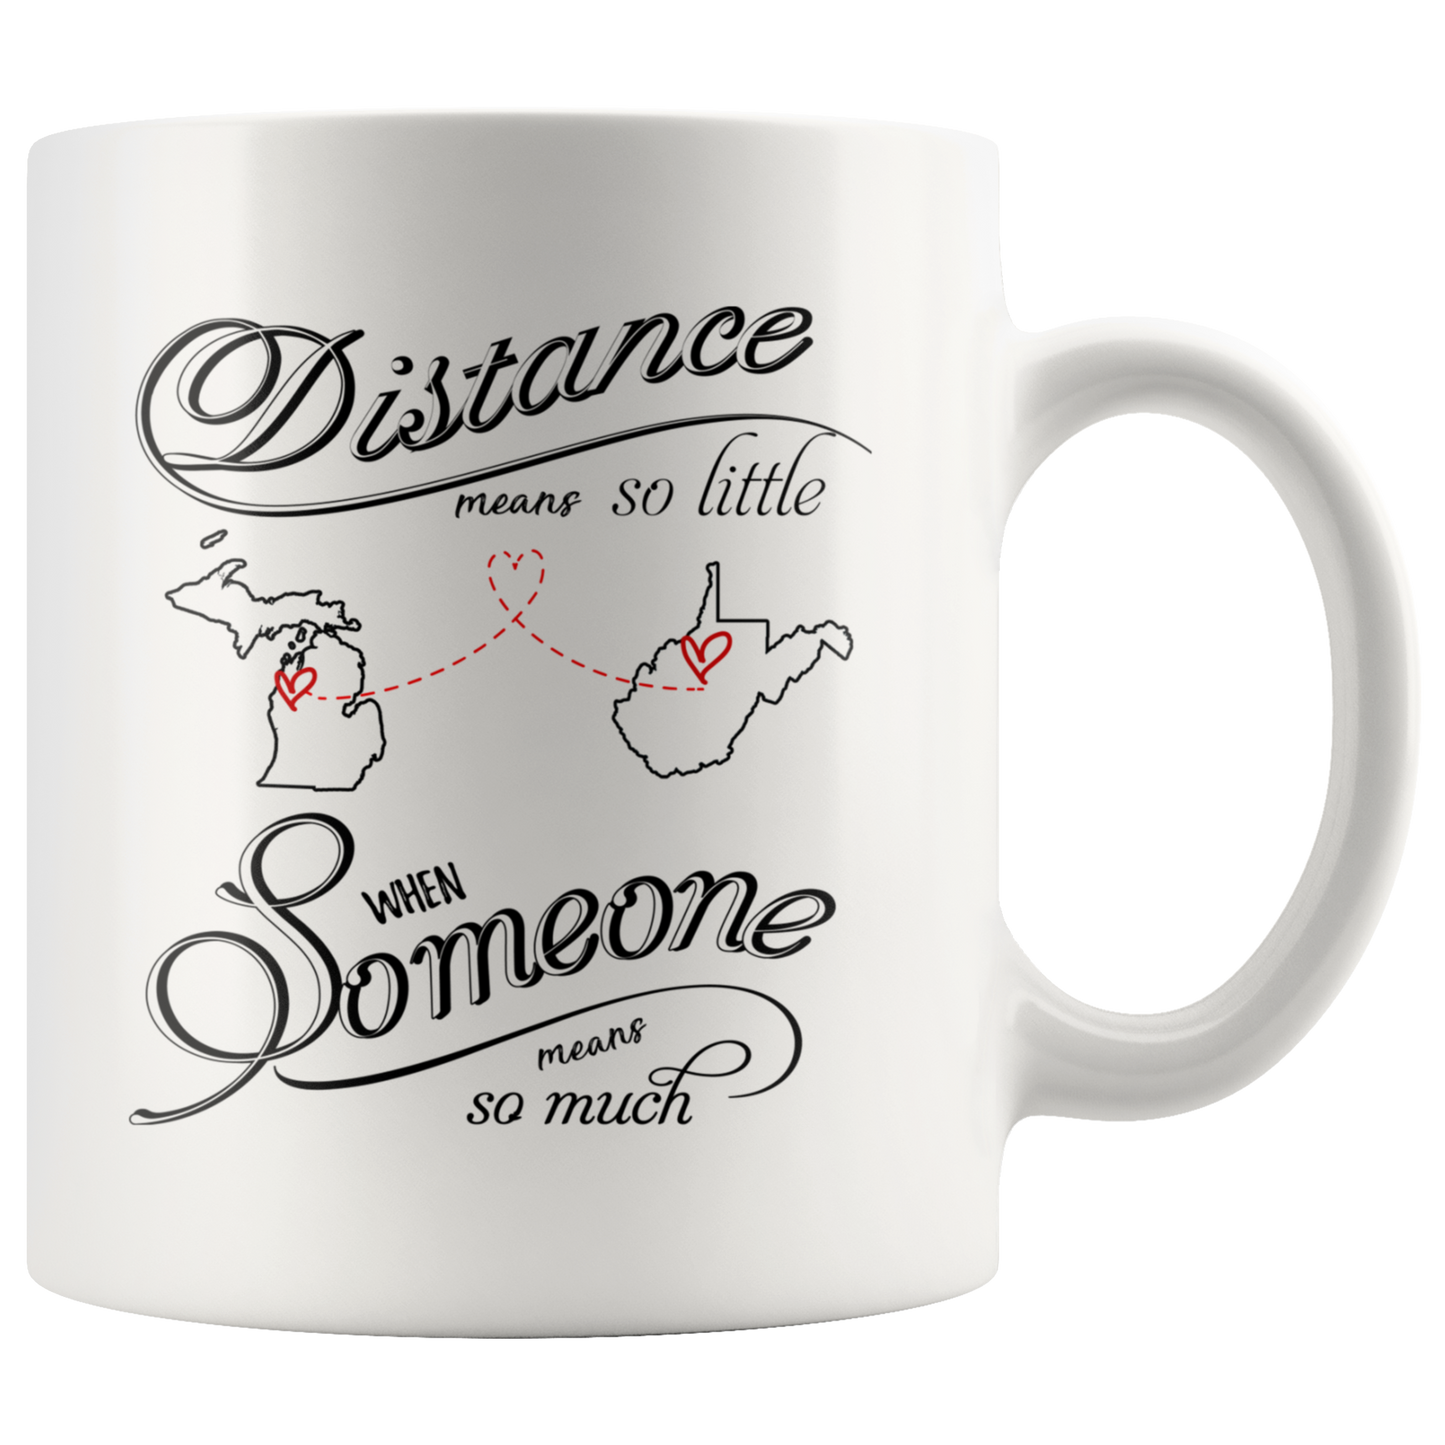 M-20485231-sp-23445 - Mothers Day Coffee Mug Michigan West Virginia Distance Means